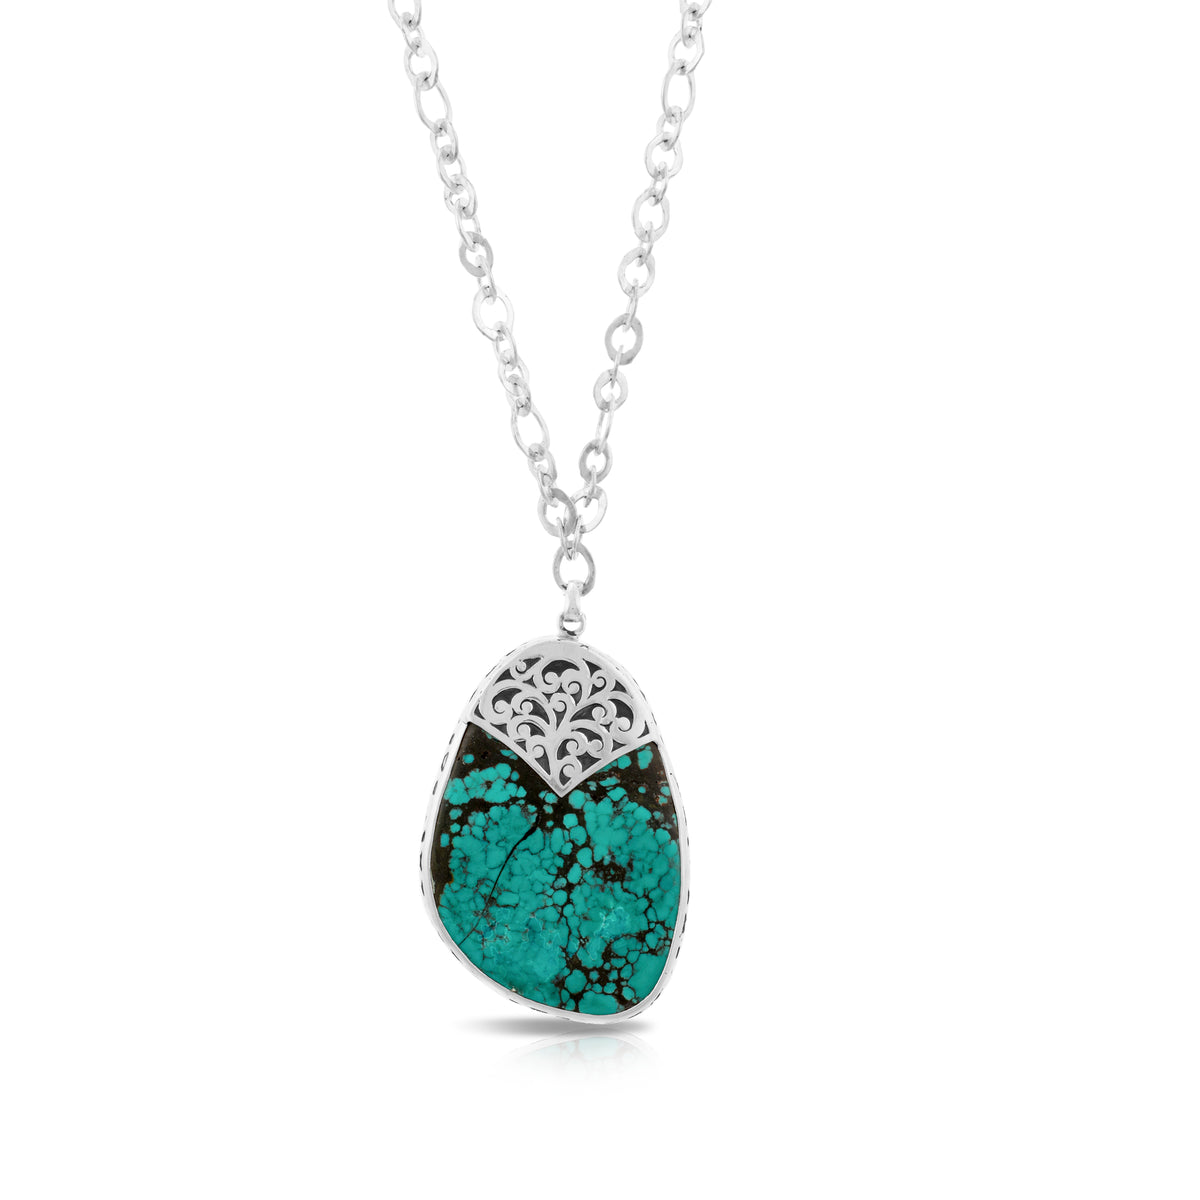 Organic Shaped Turquoise with Hand Carved LH Scroll Rim on Handmade Sterling 16" Silver Chain. Pendant 43 by 60 mm